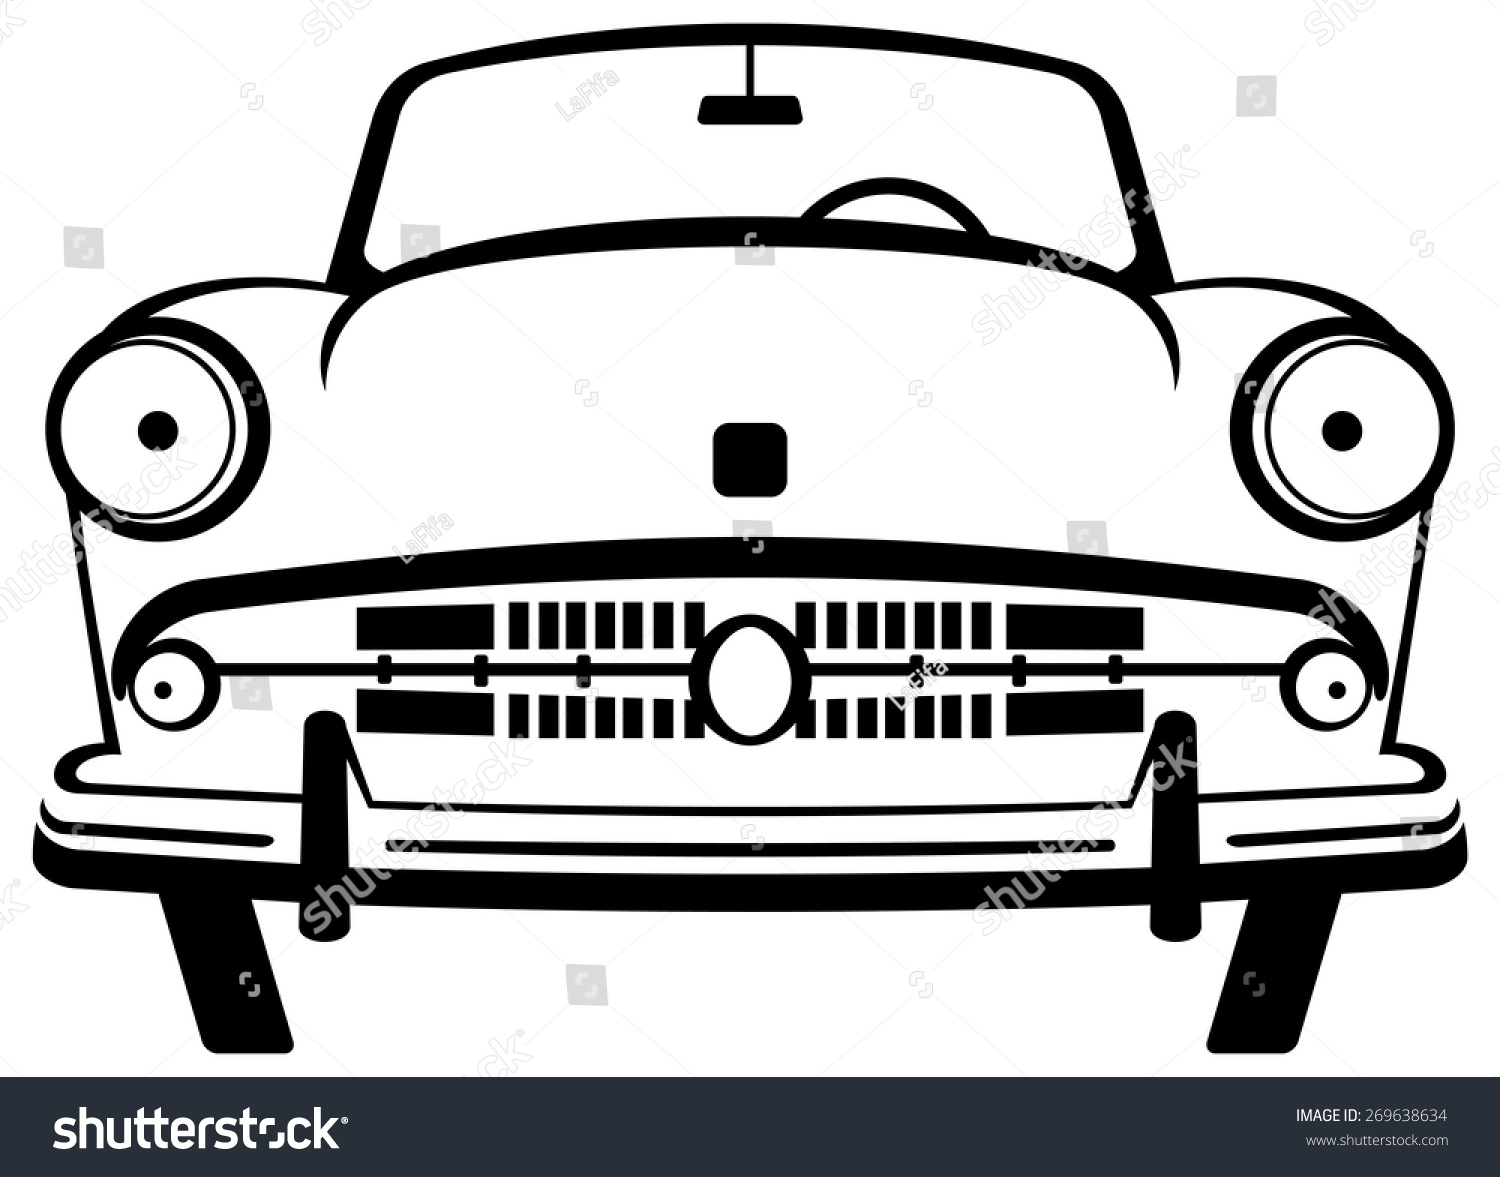 Outline Image Old Car Stock Vector (Royalty Free) 269638634